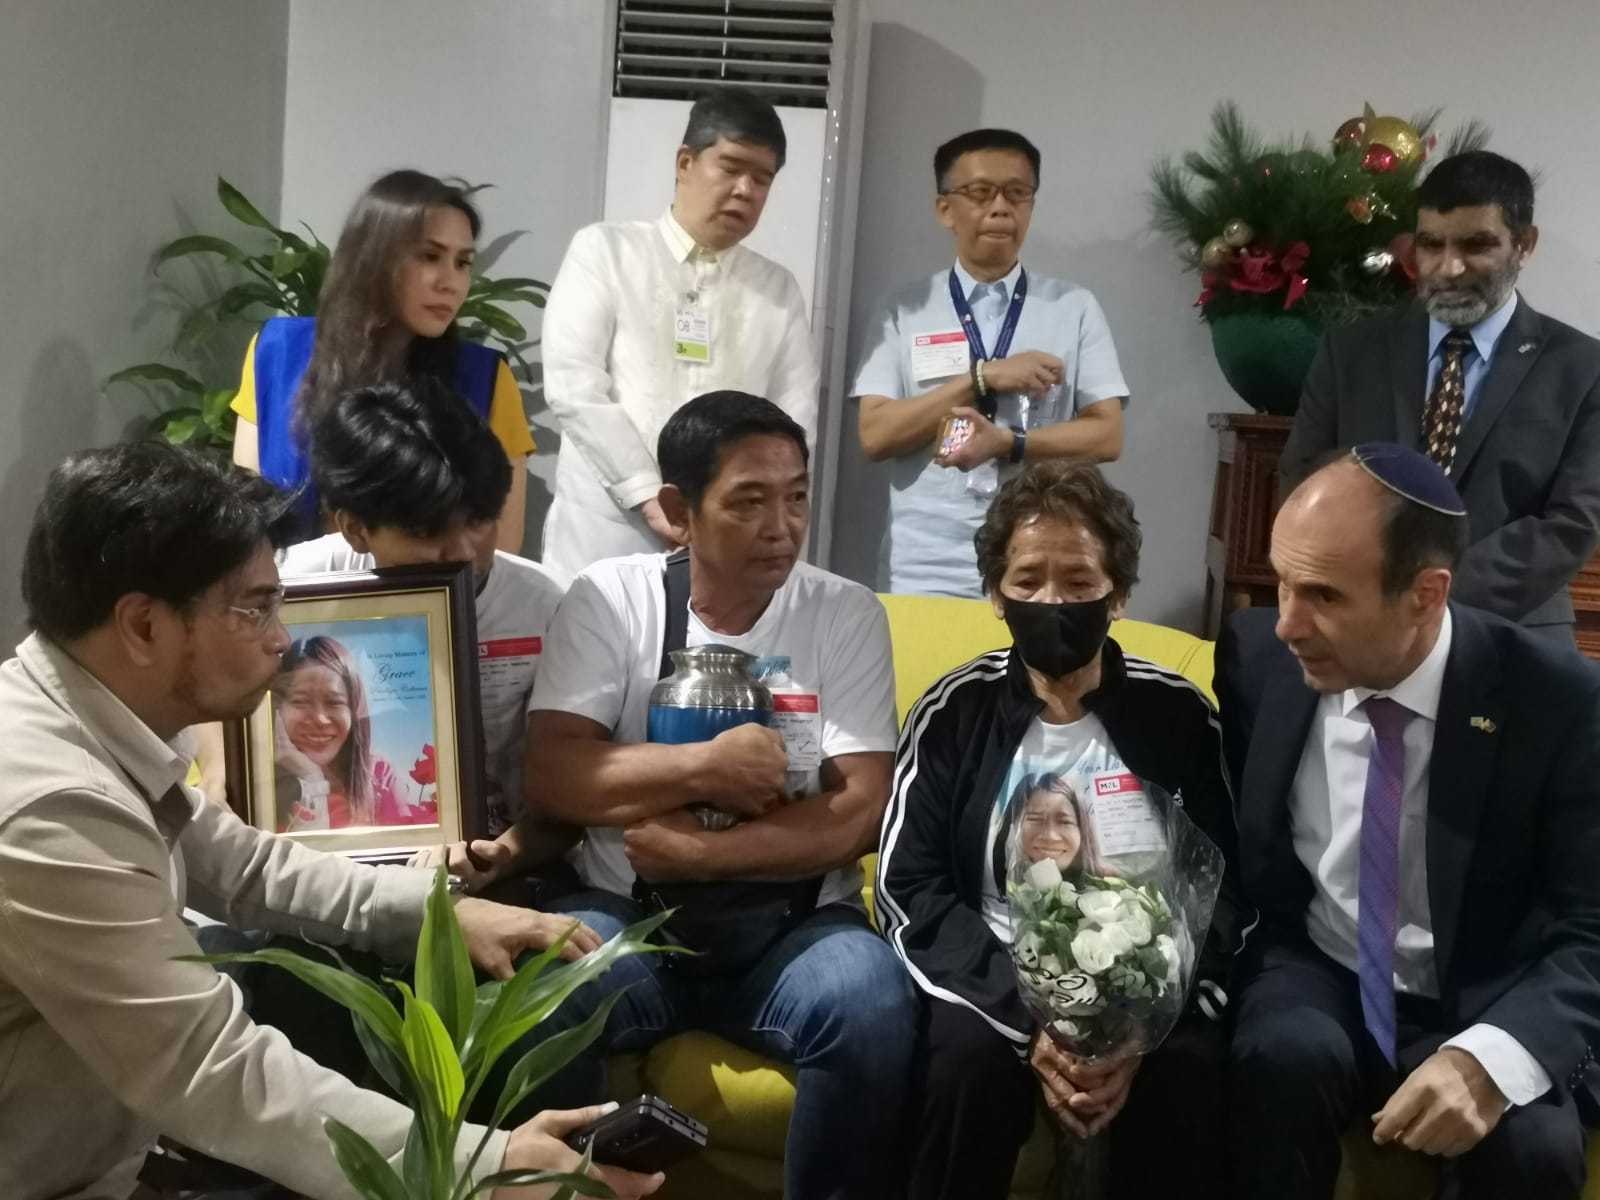 Israel Envoy honors Filipina caregiver; slain OFW’s family to receive “lifetime benefits” from Israeli government